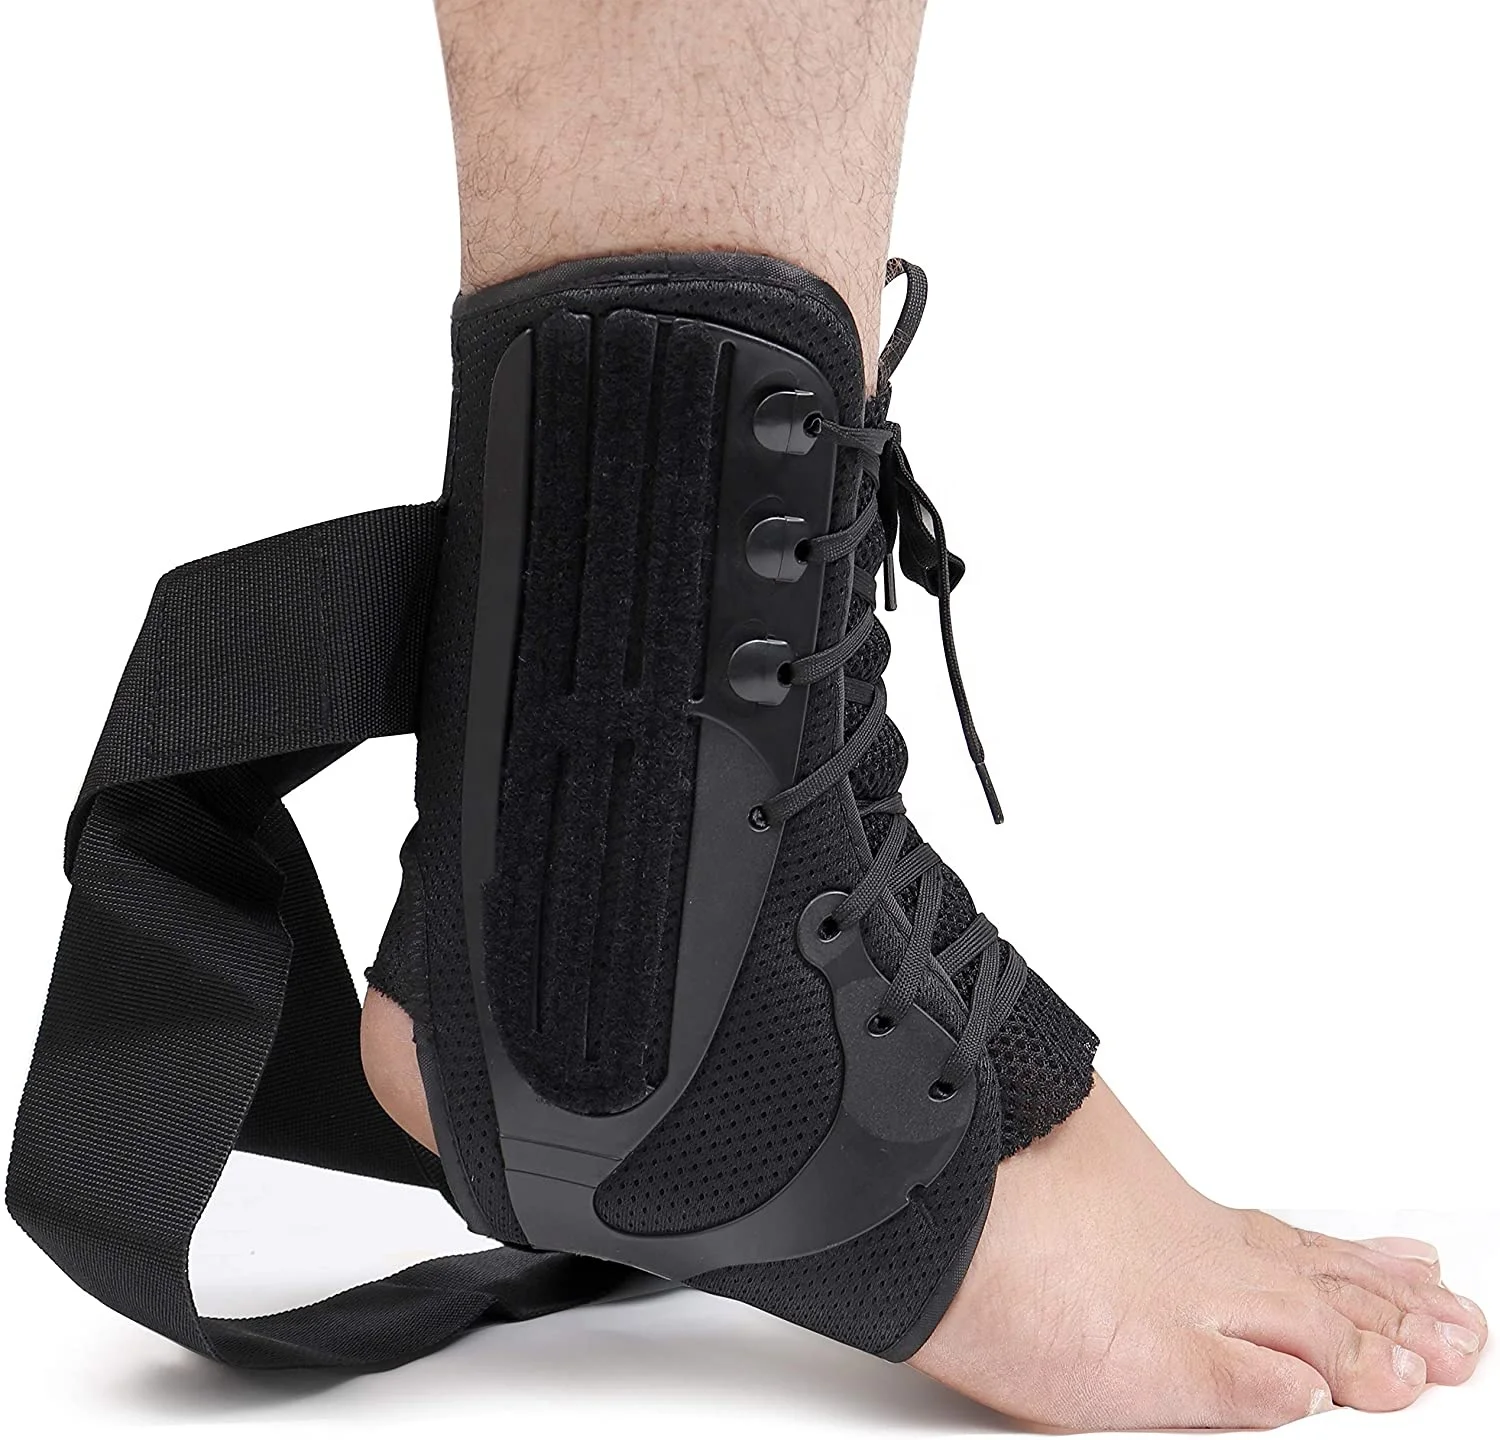 
Sports orthopedic ankle support foot splint Enhance ankle fracture brace CE proved adjustable ankle support 